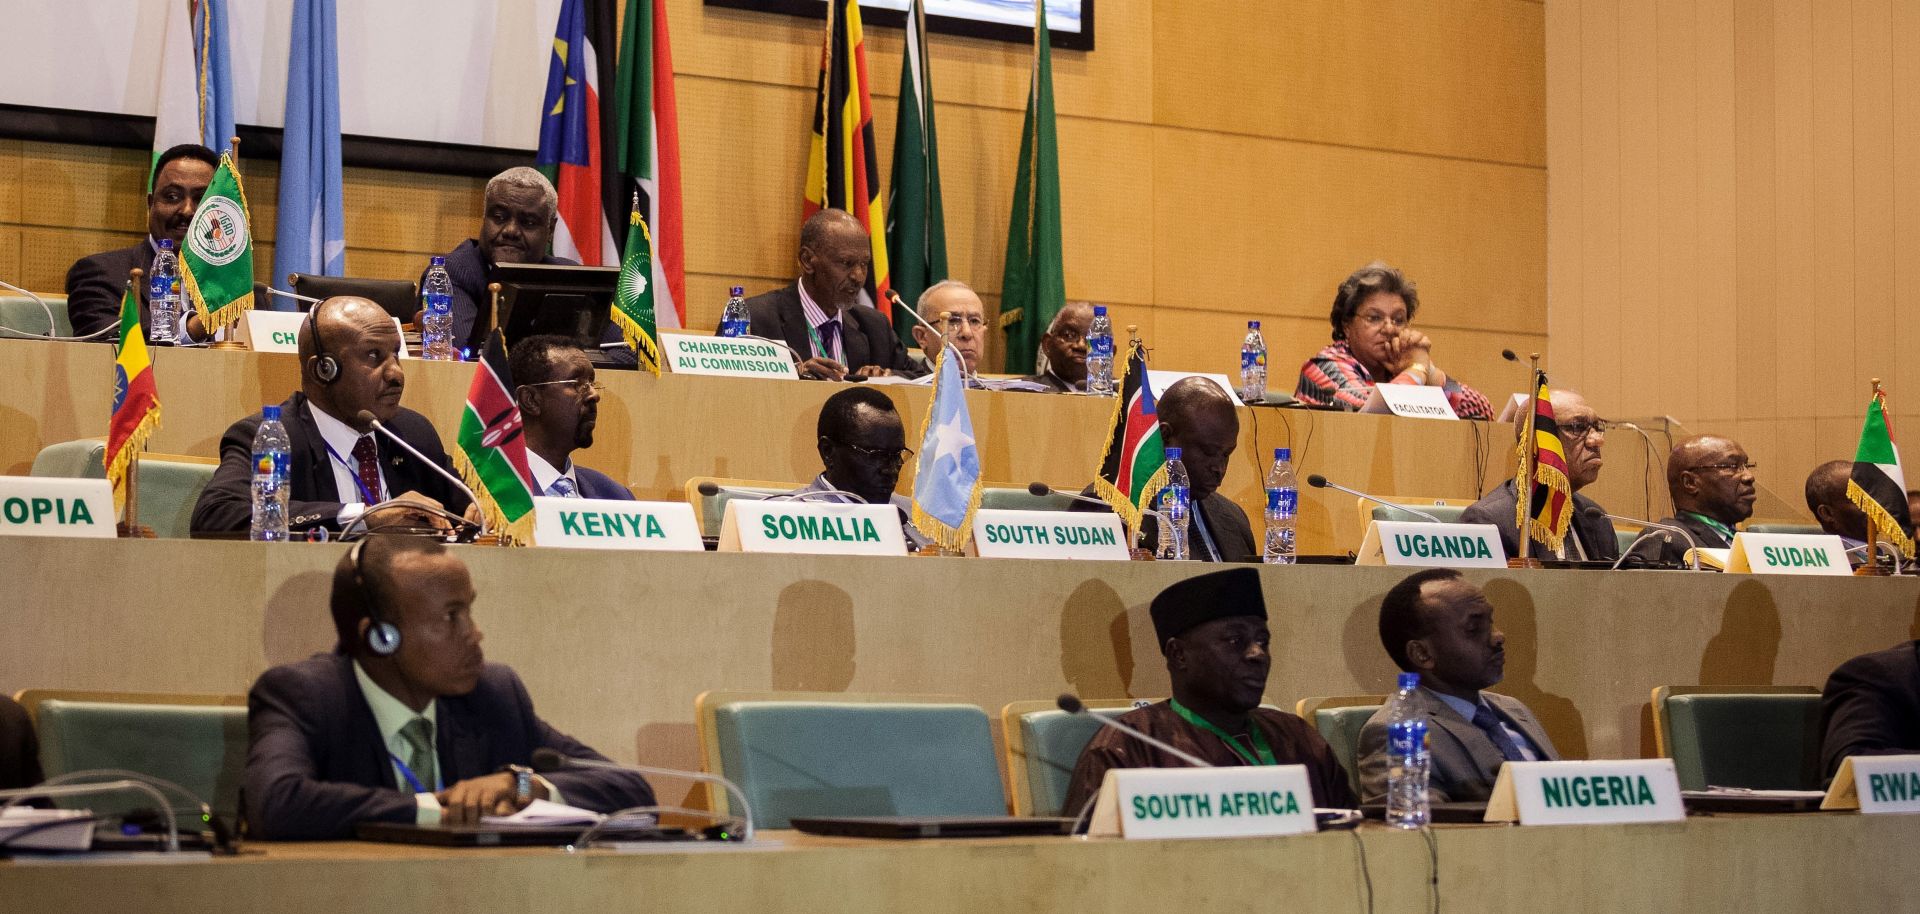 Representatives from the Intergovernmental Authority for Development, including Moussa Faki, chairperson of the African Union (top row, second from left), gather in Ethiopia Dec. 21, 2017, as members of South Sudan's government and insurgent groups sign a cease-fire.  